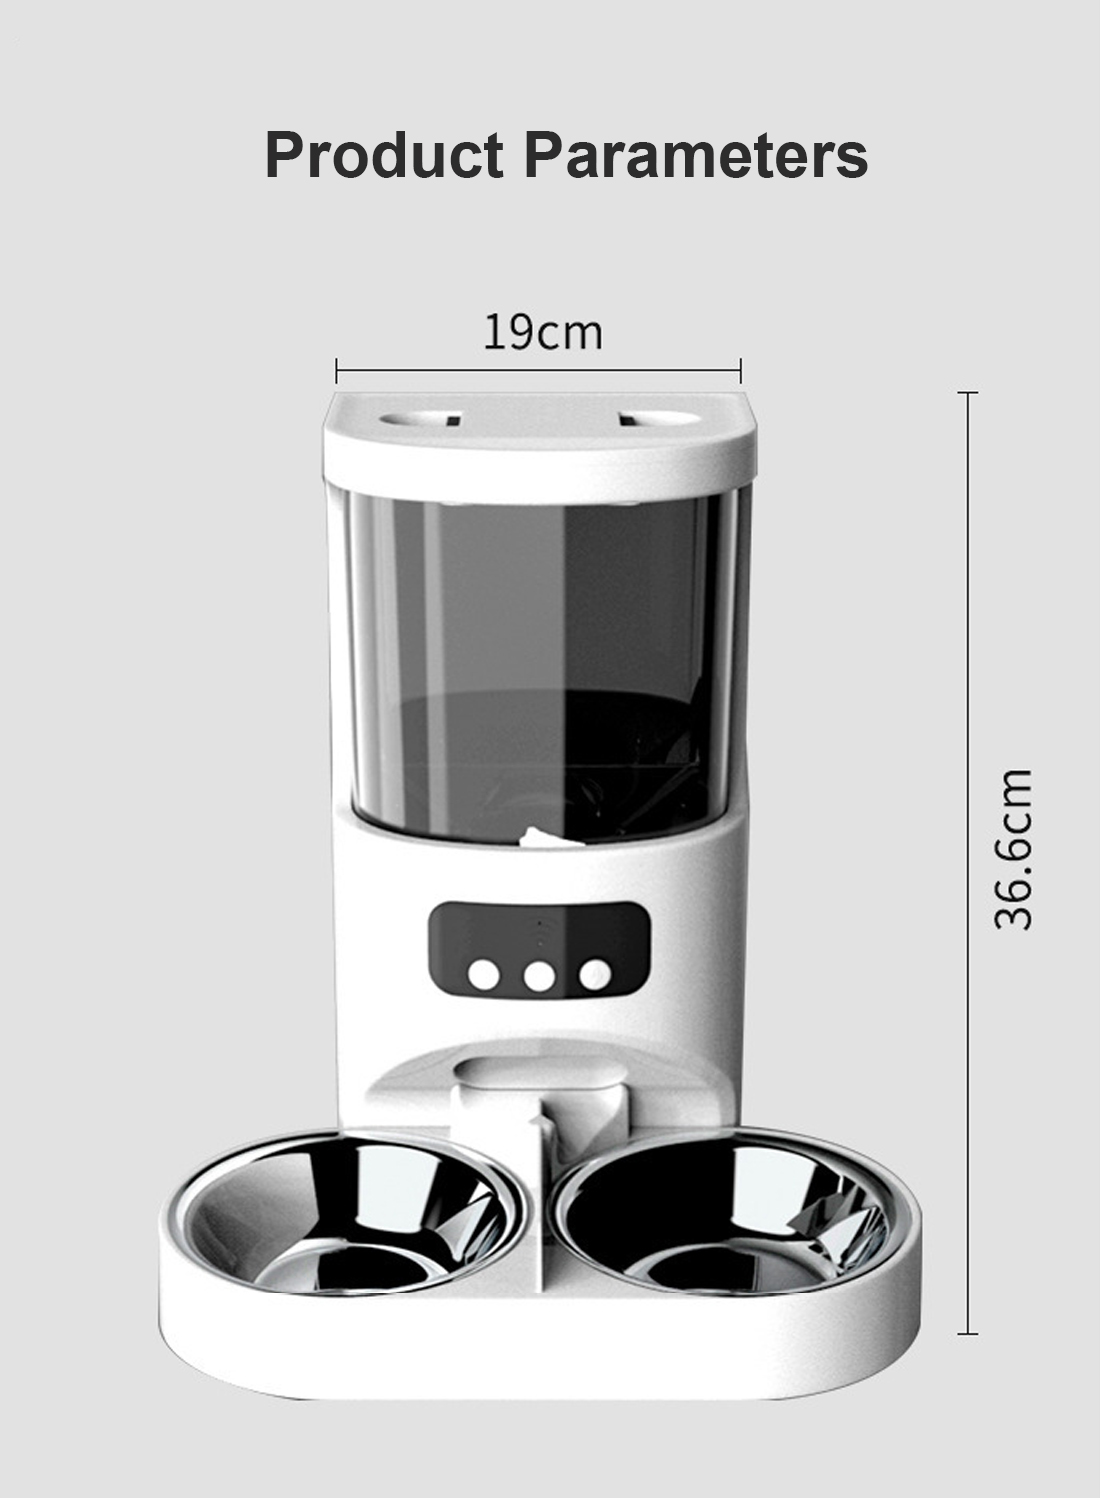 Smart Dual-Bowl Automatic Pet Feeder - 4L Capacity Smartphone-Controlled Accurate Portioning for Multiple Pets